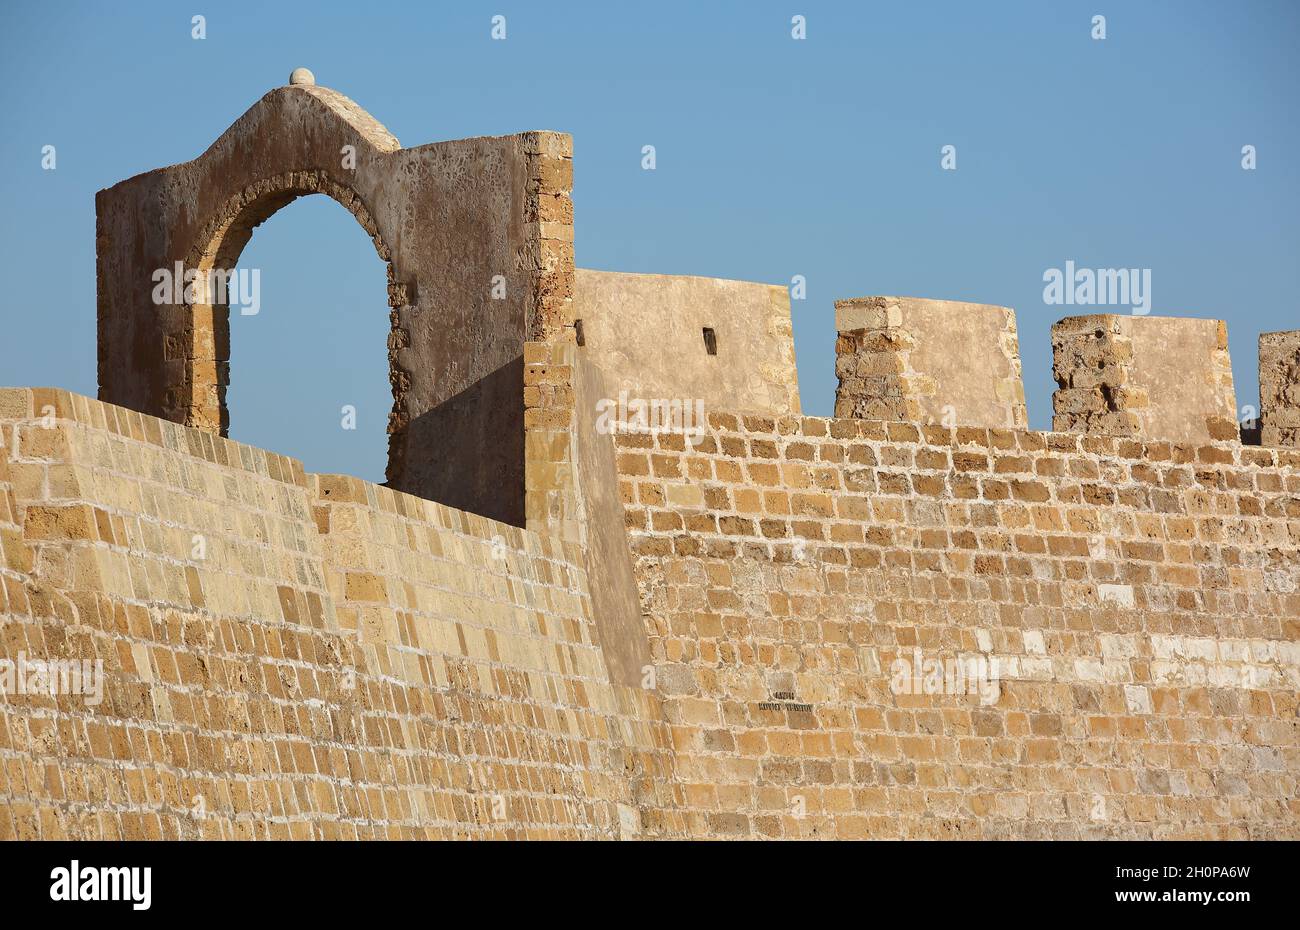 Wall of Firka Venetian Fortress in Chania, Crete, arch and architectural details, against clear blue sky Stock Photo